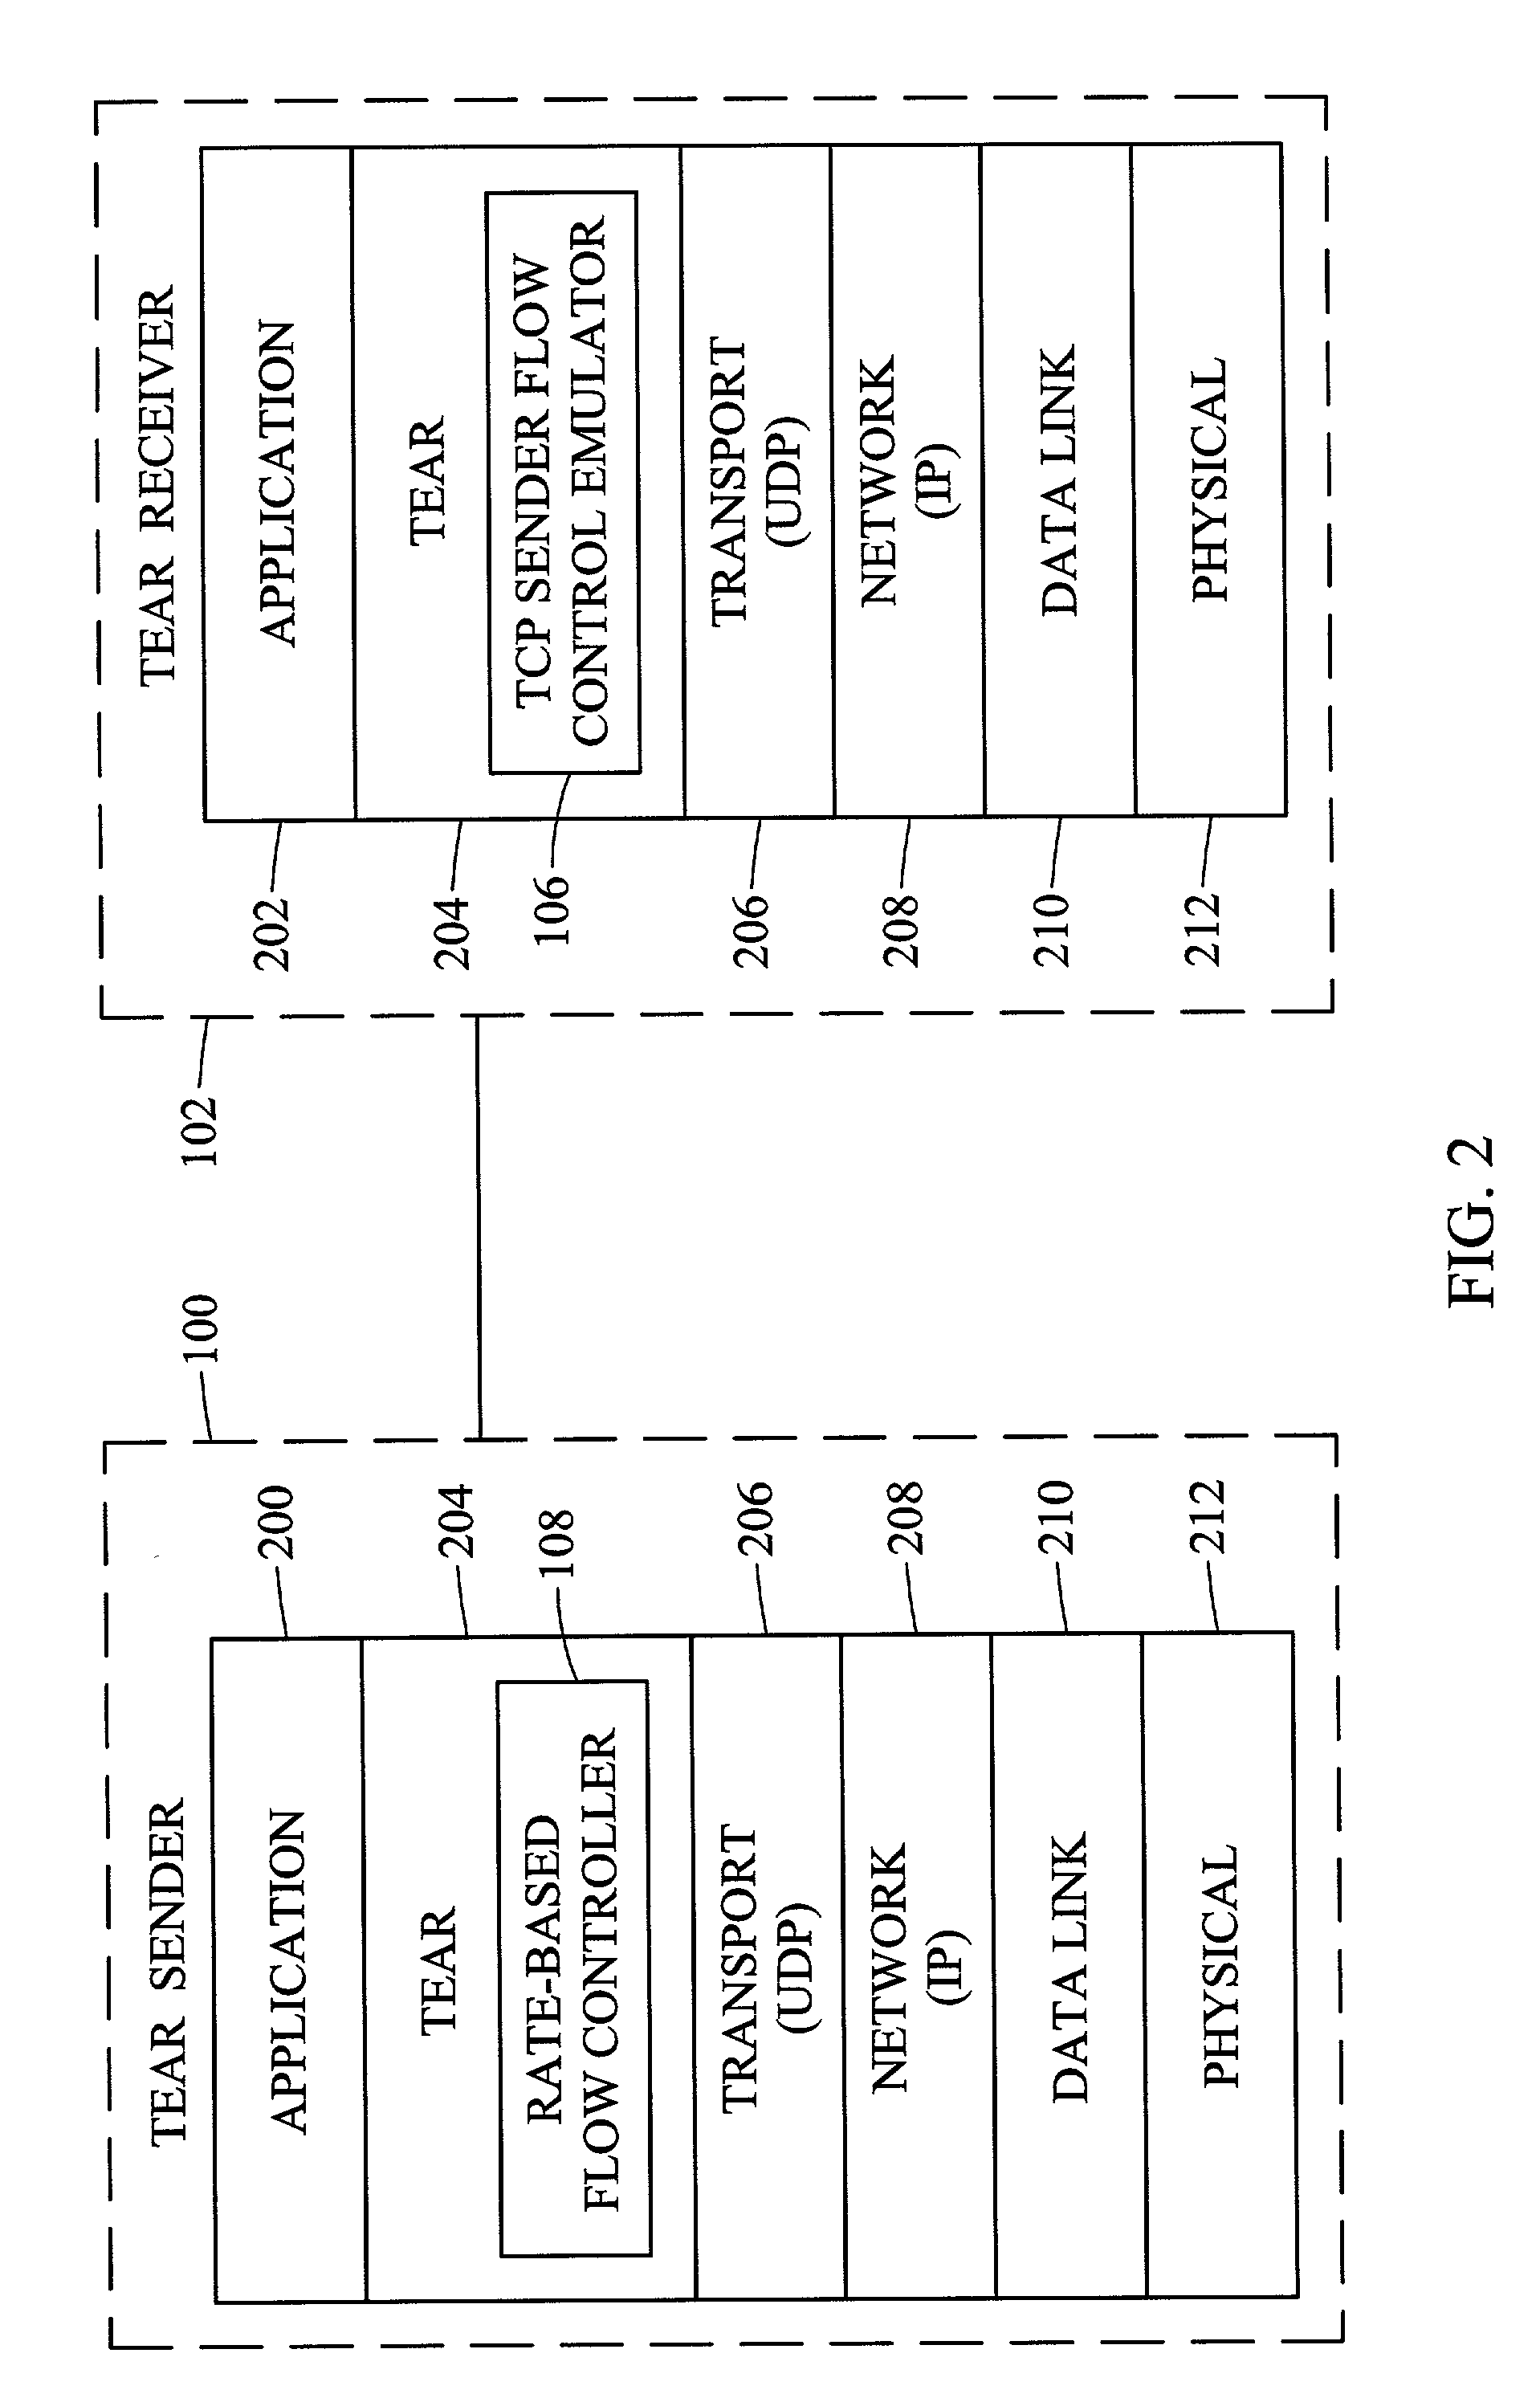 Methods and systems for rate-based flow control between a sender and a receiver